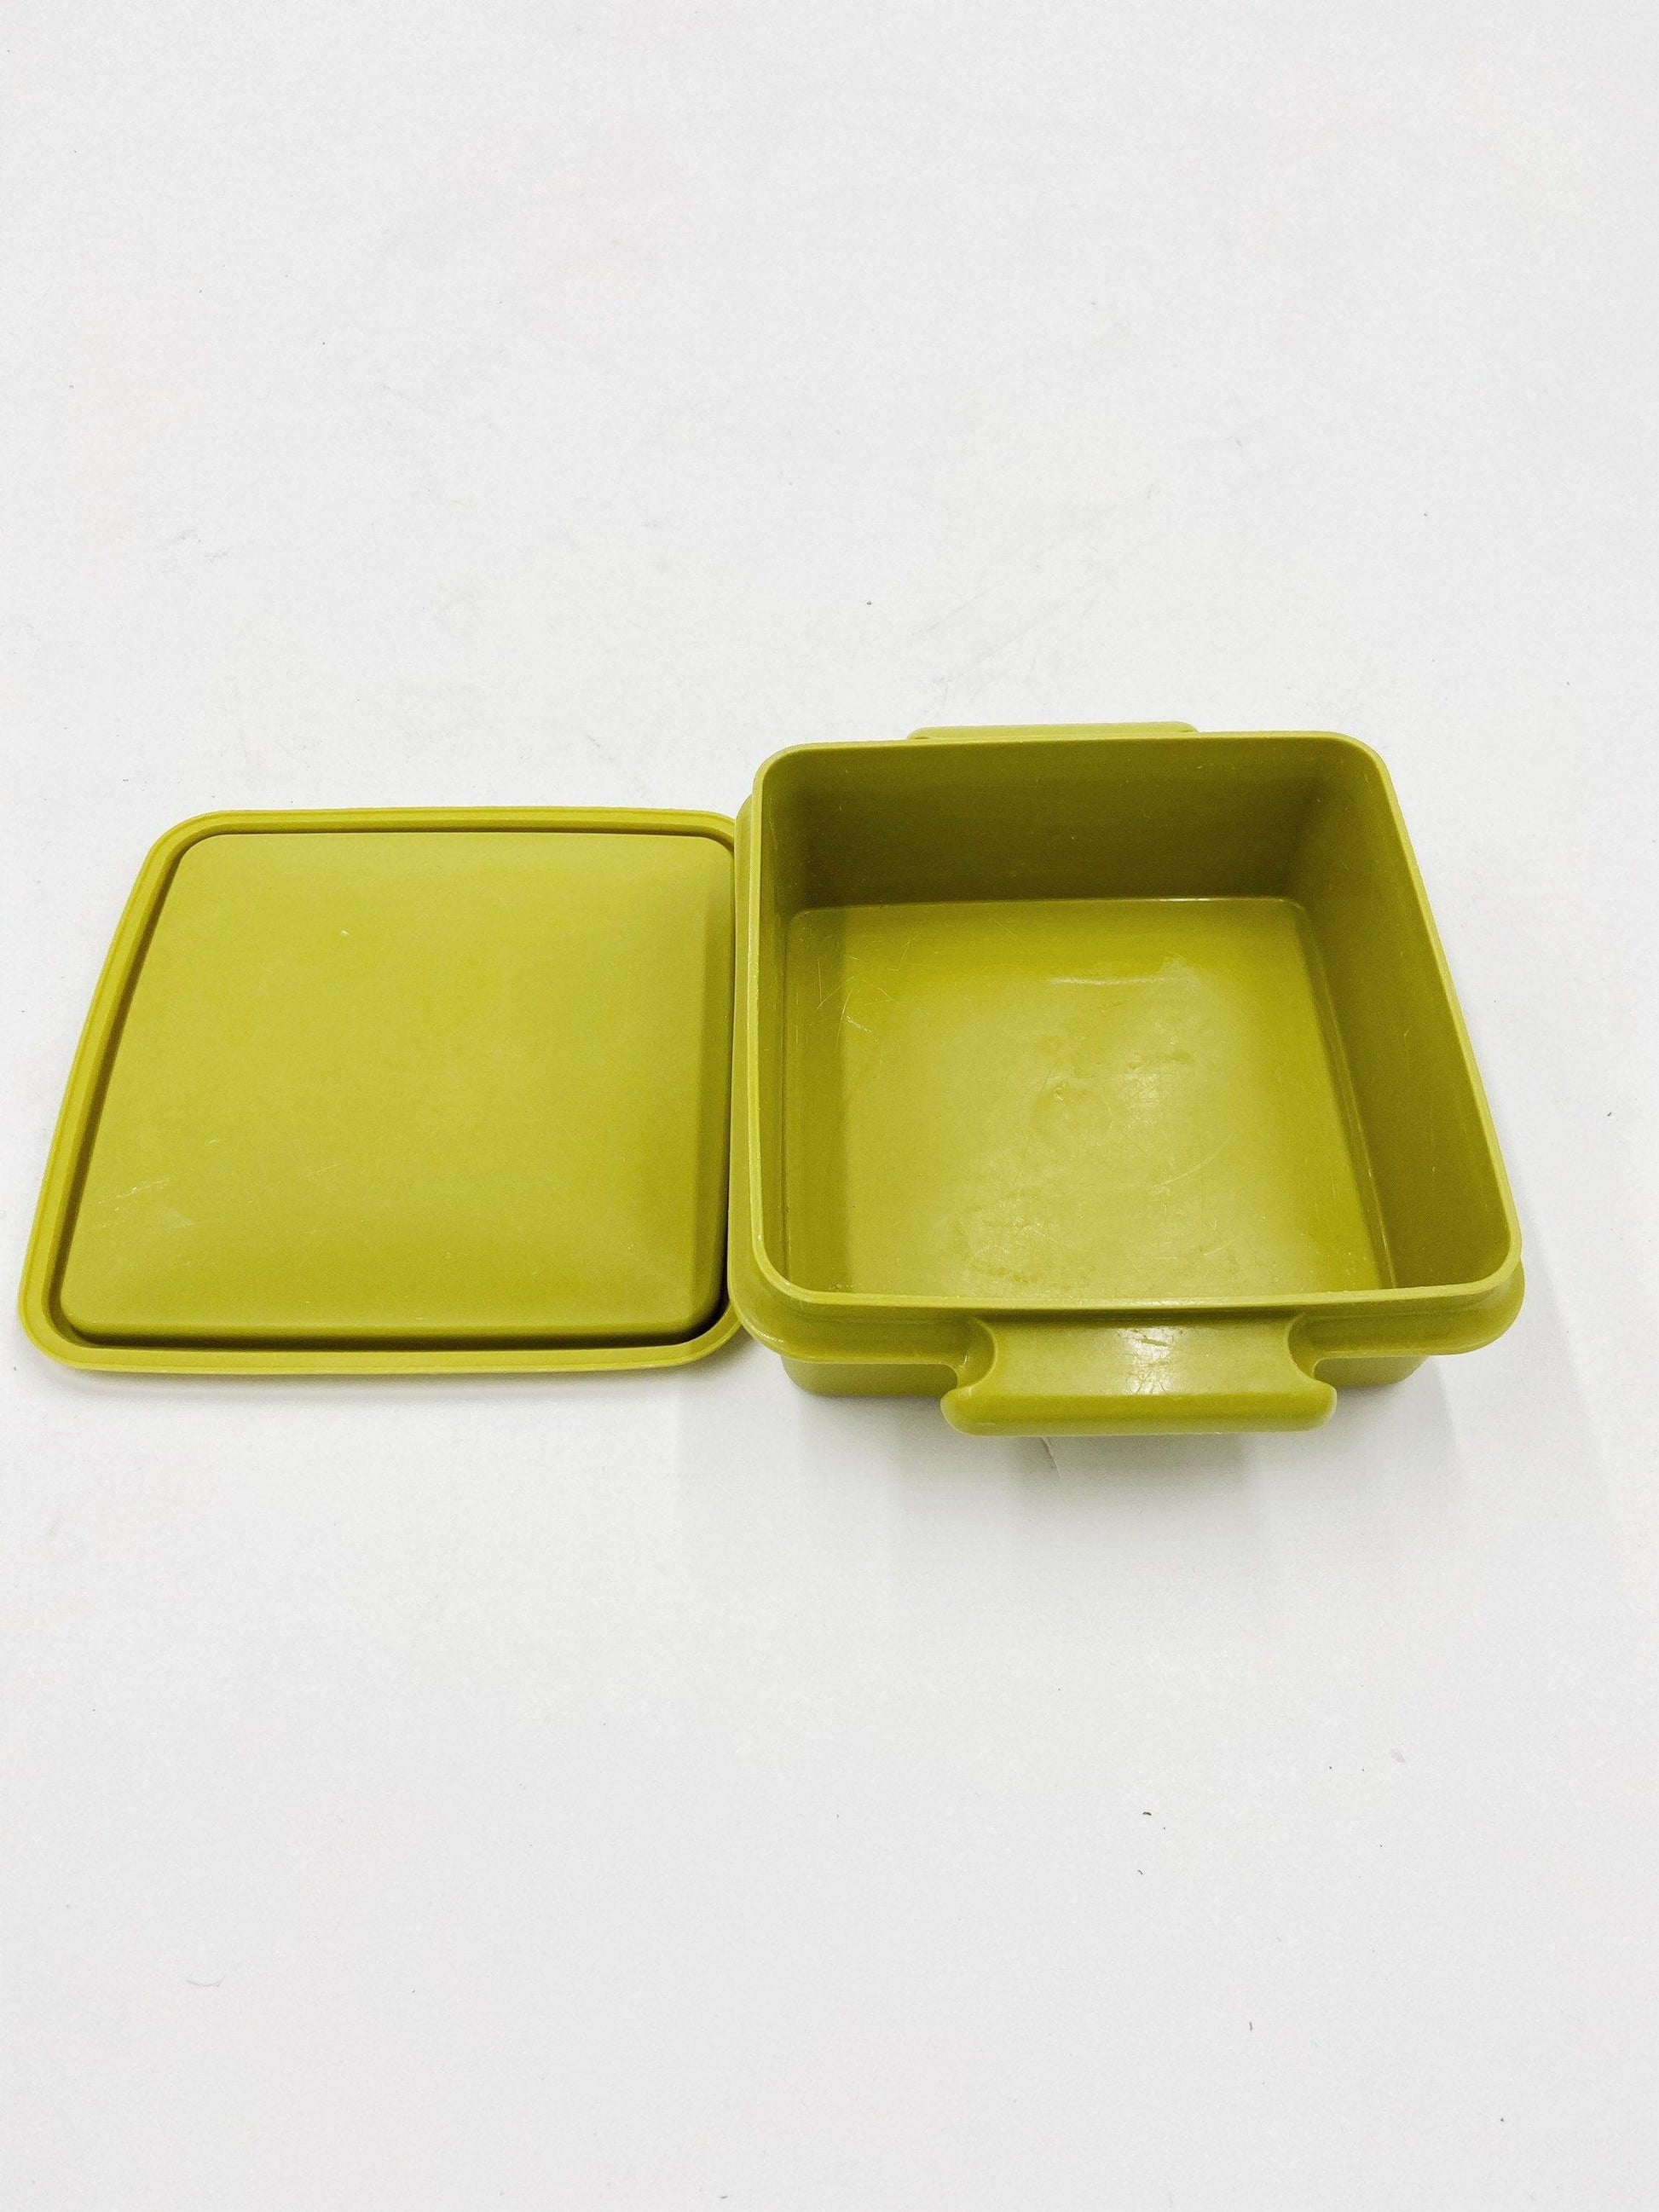 https://funkyhousevintage.com/cdn/shop/files/vintage-green-tupperware-square-stacking-bowl-antique-tupper-ware-food-storage-retro-kitchen-mid-century-modern-kitchen-decor-1970s-located-at-funkyhouse-vintage-antique-store-weiser_080f694b-980c-4dfb-9a0b-182a3f9759e7.jpg?v=1688592961&width=1946